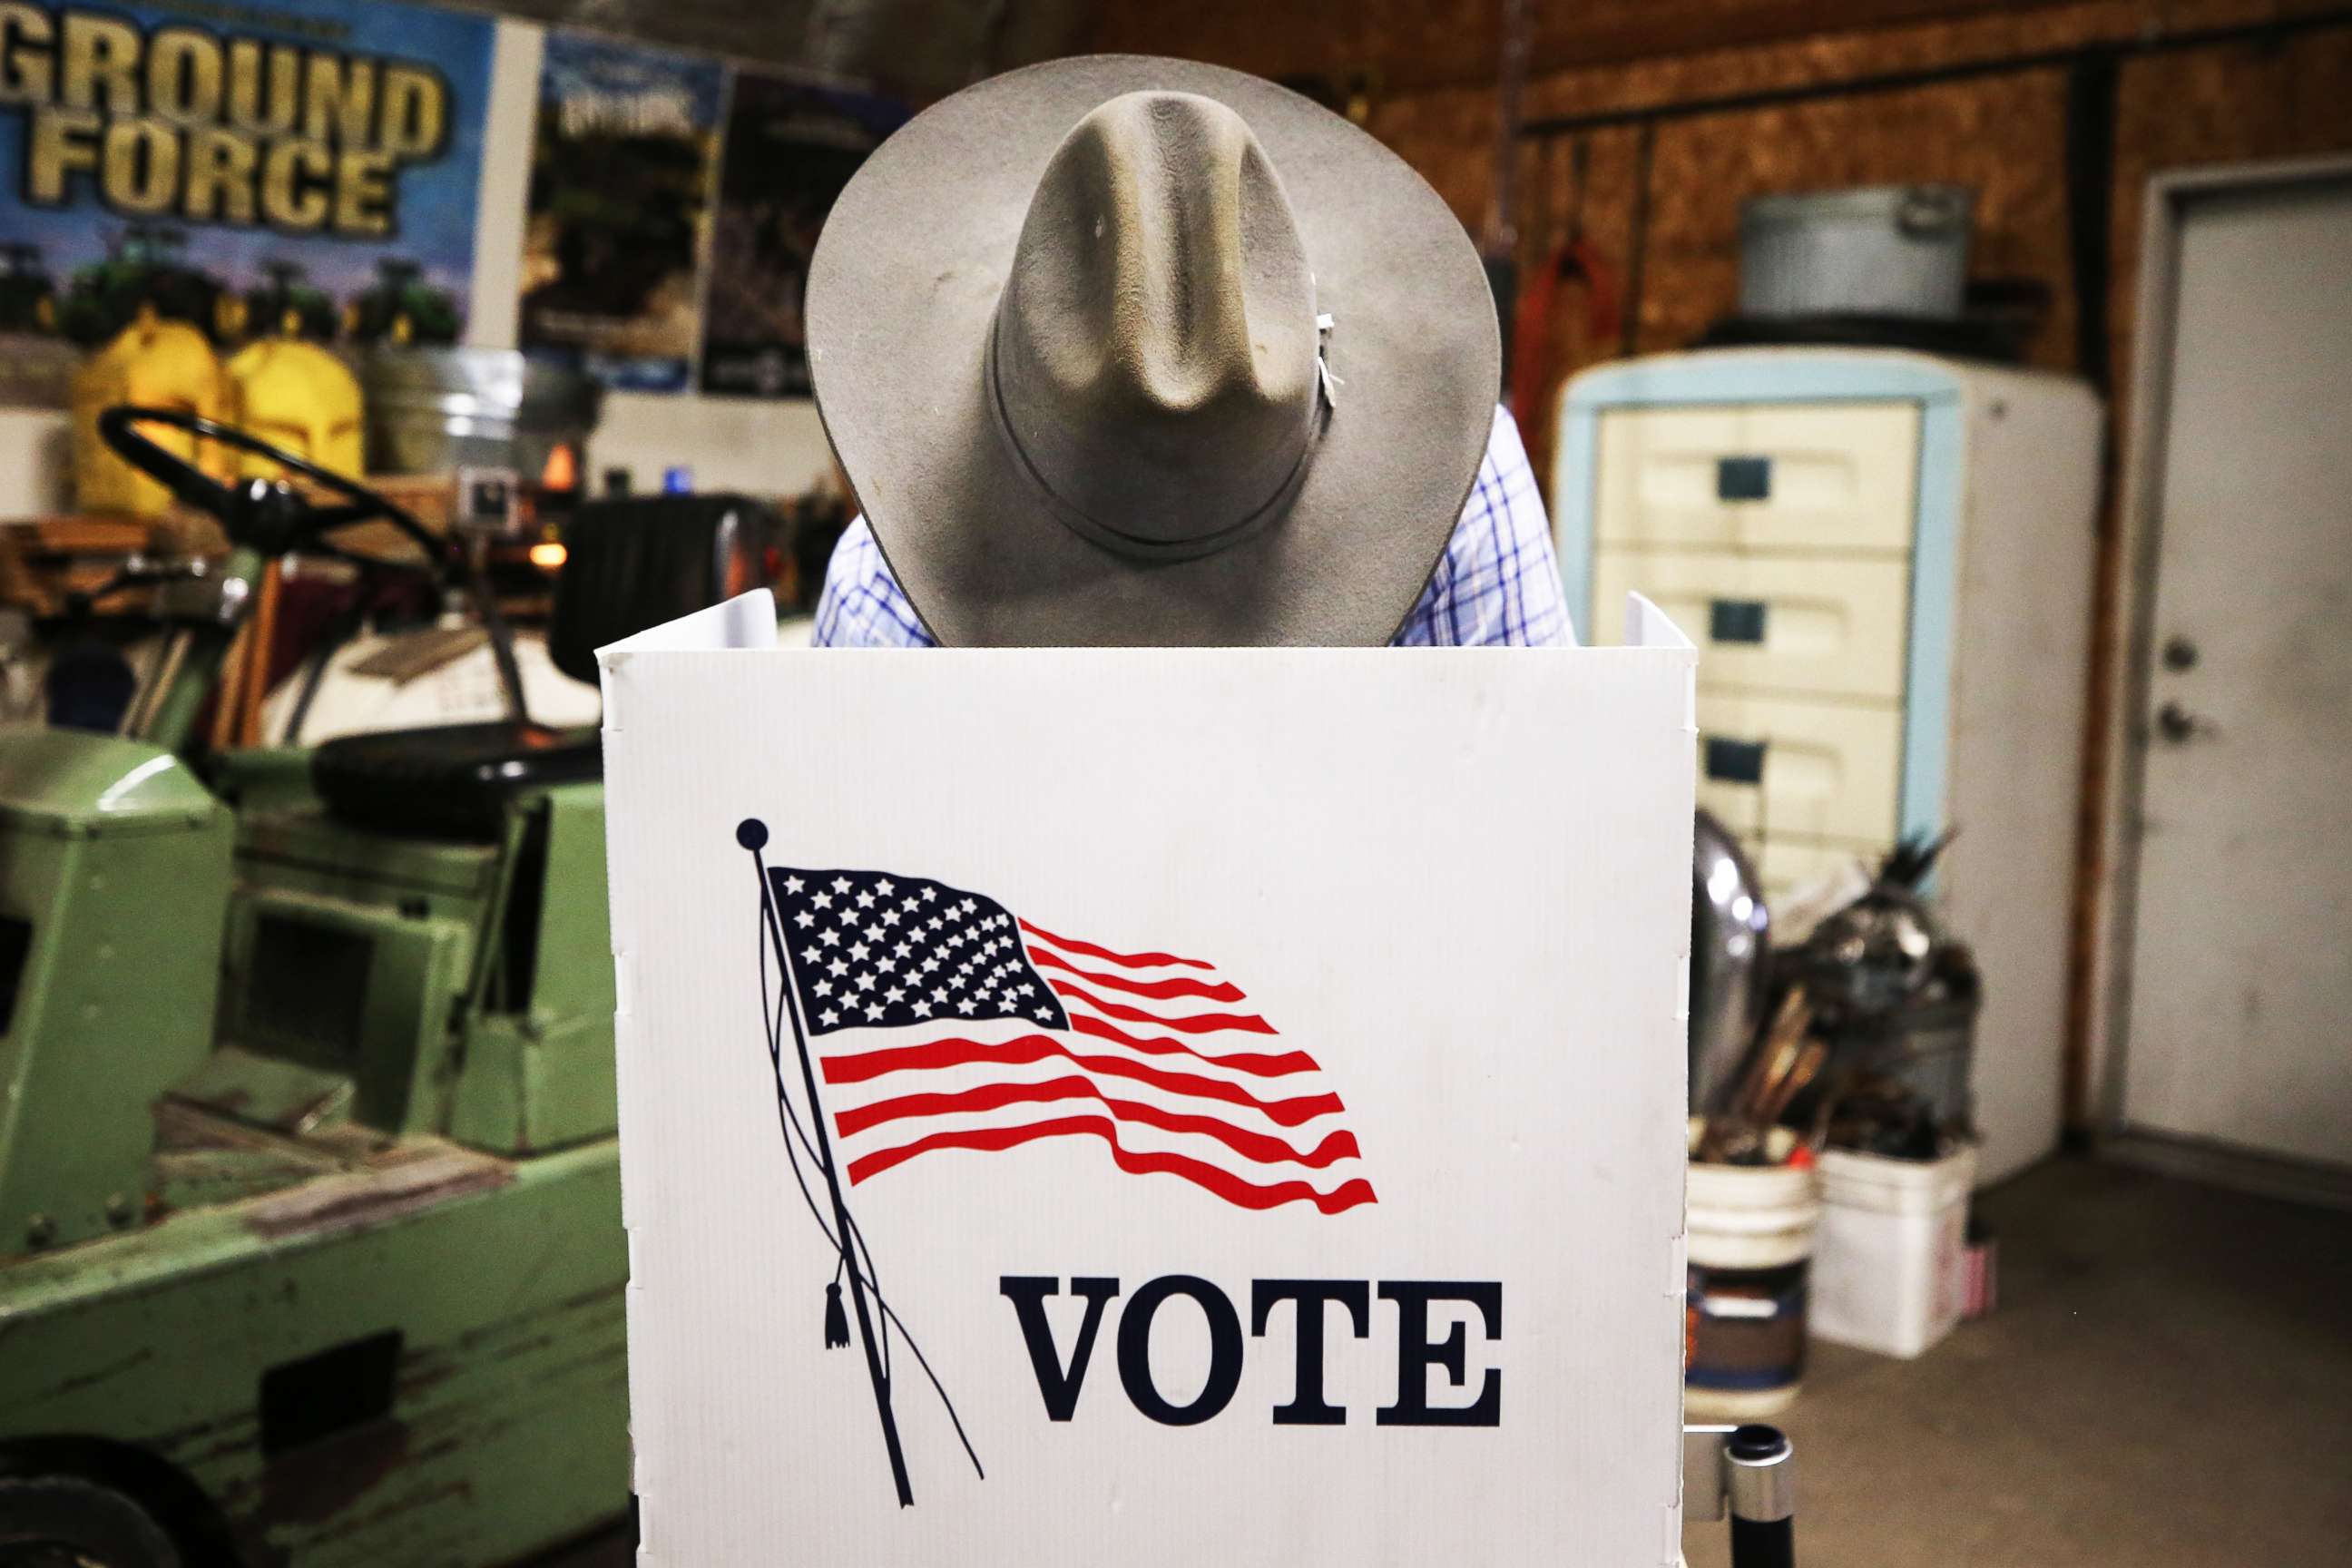 PHOTO: A voter marks his ballot at a polling place in Dennis Wilkening's shed on November 3, 2020 in Richland, Iowa.